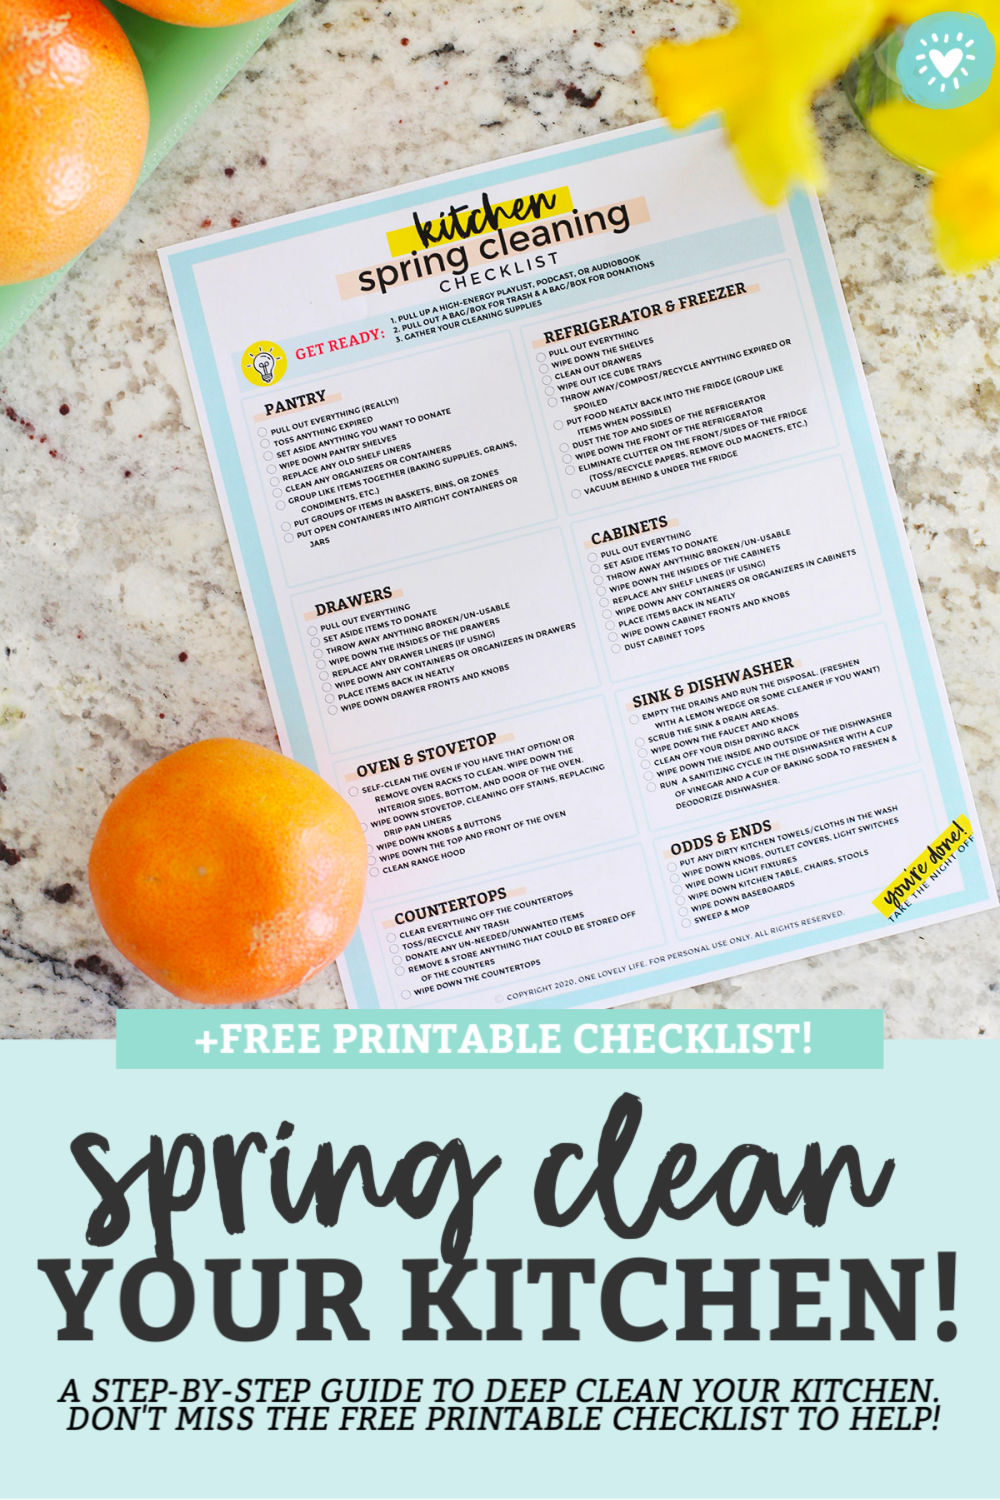 How to Deep-Clean Your Kitchen. A step-by-step checklist to clean your kitchen! Perfect for spring cleaning! // Kitchen Cleaning Tips // Spring Cleaning // Kitchen Cleaning Checklist #cleaningtips #springcleaning #kitchen #kitchentips #freeprintable